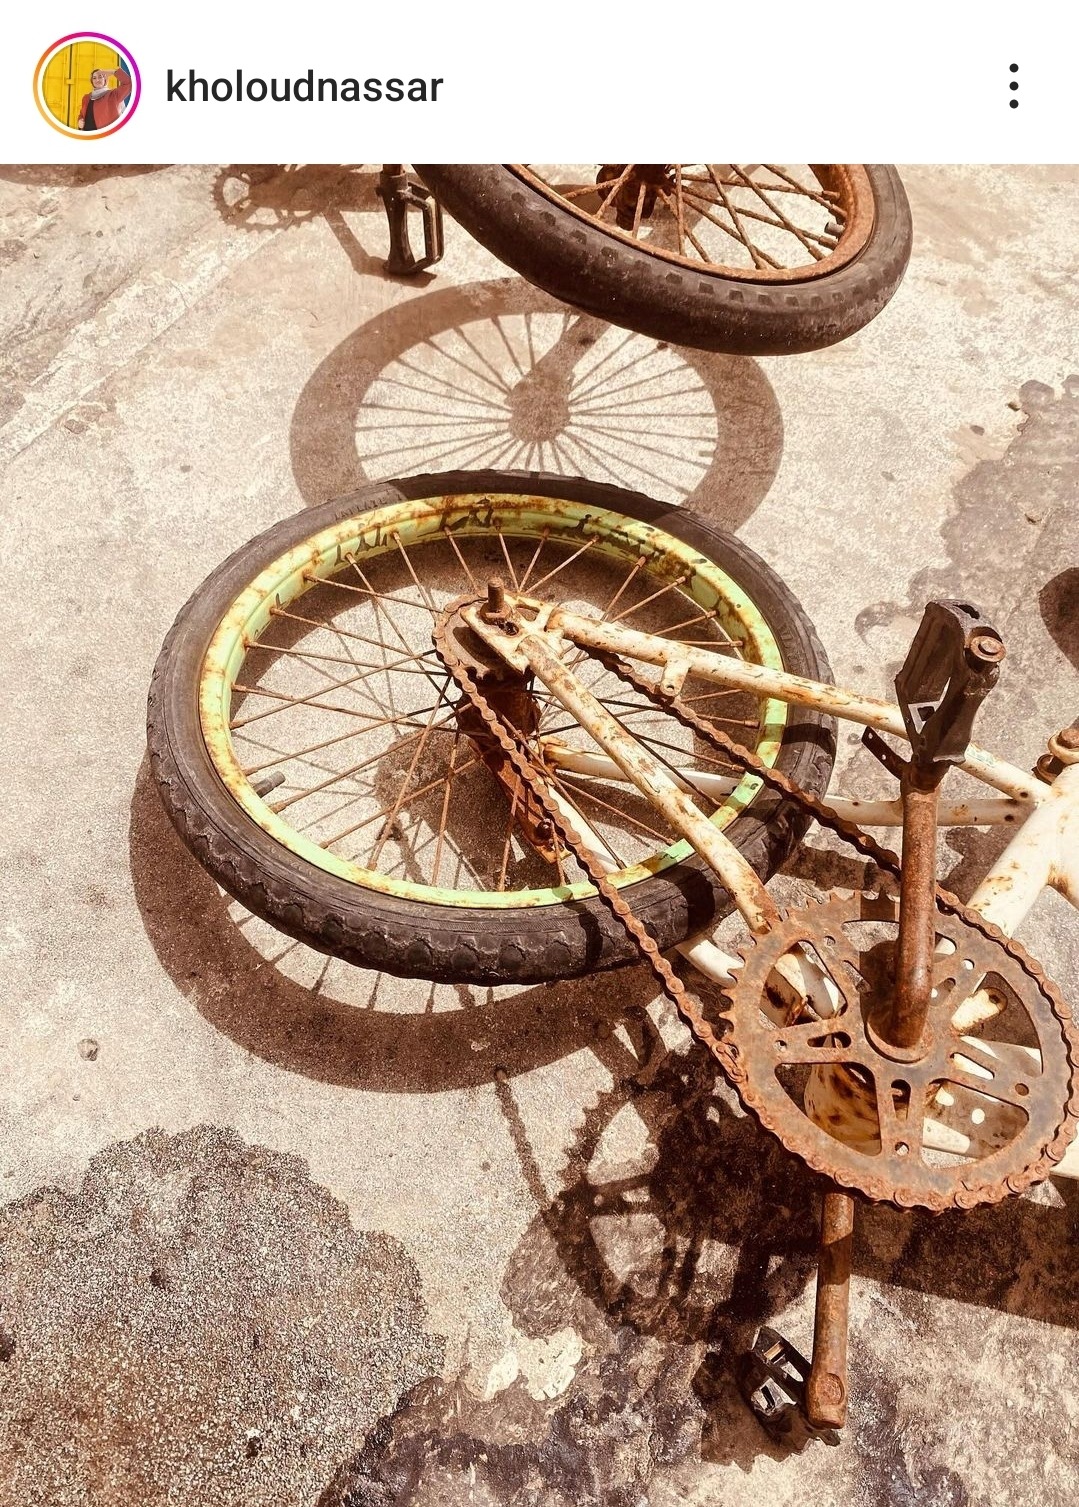 A photo of two rusty bikes on the ground